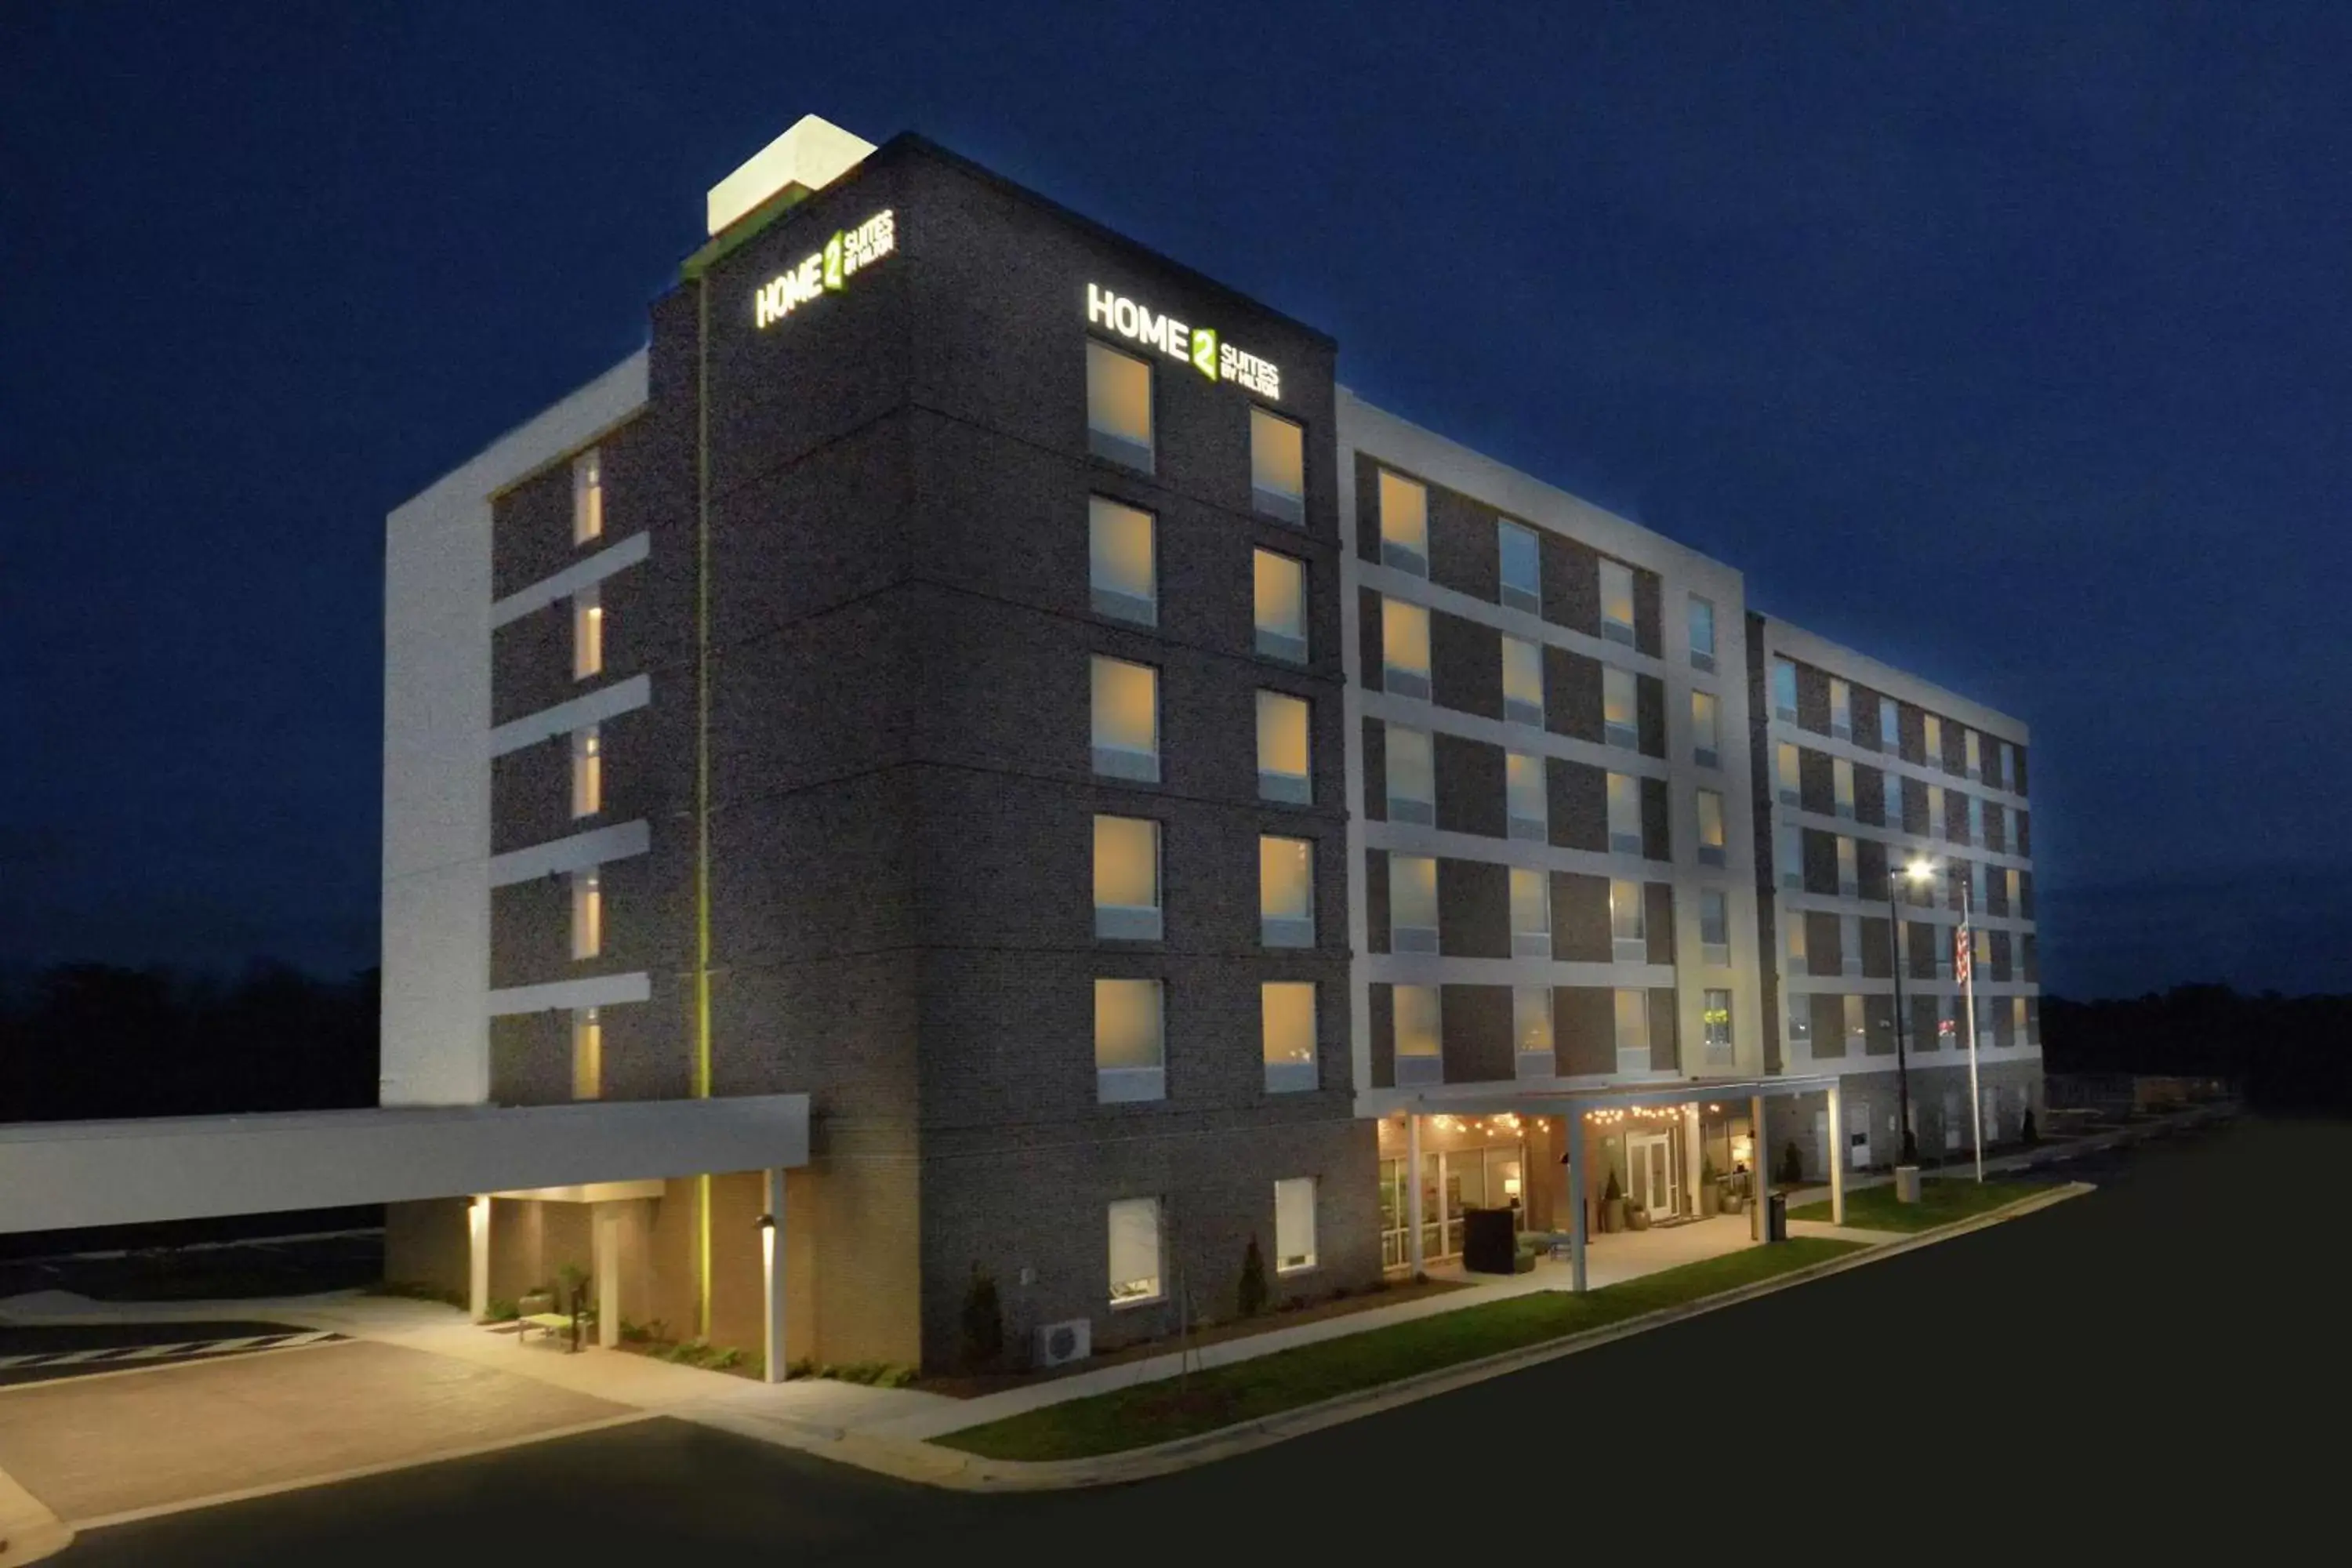 Property Building in Home2 Suites By Hilton Duncan